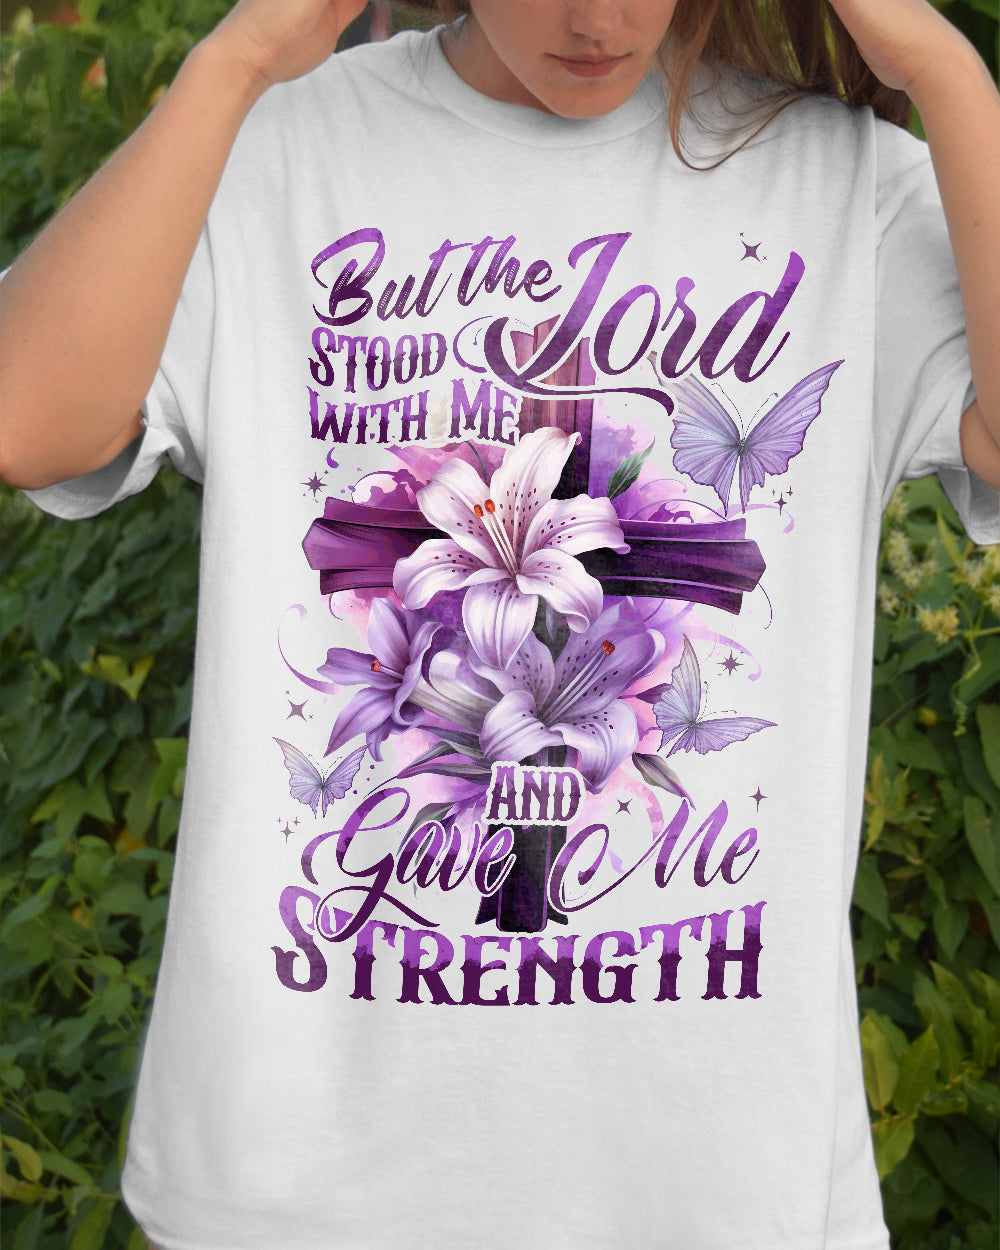 Lord Stood With Me Cotton Shirt - Tytd1008233